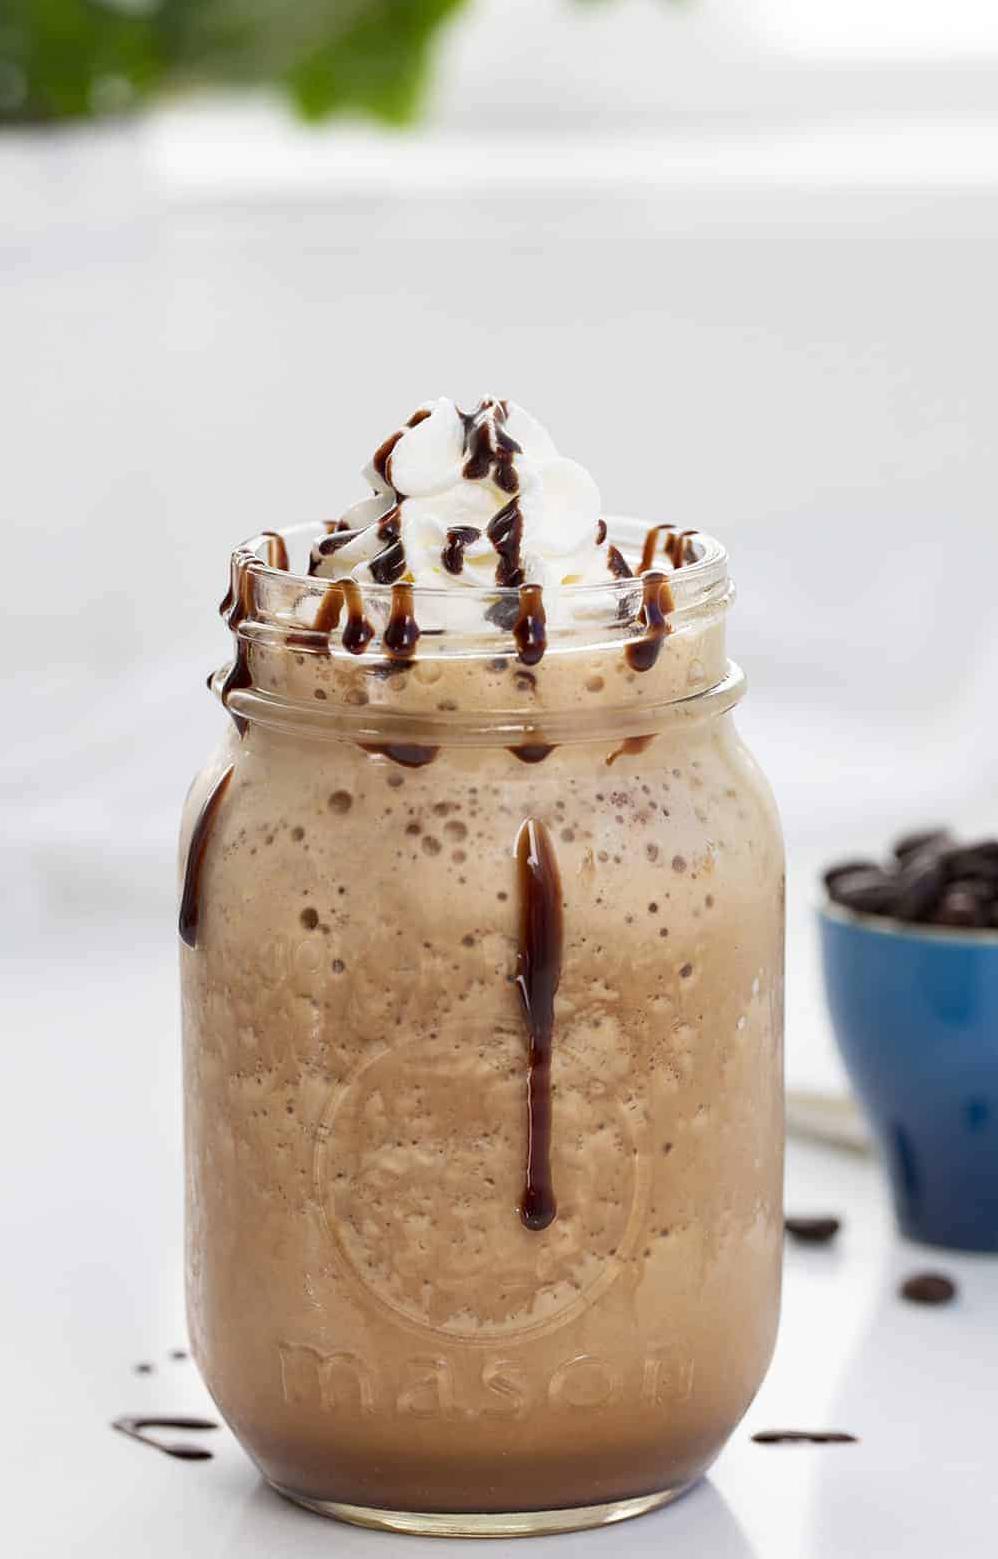  Start your day with a delicious Chocolate Mocha Frappuccino